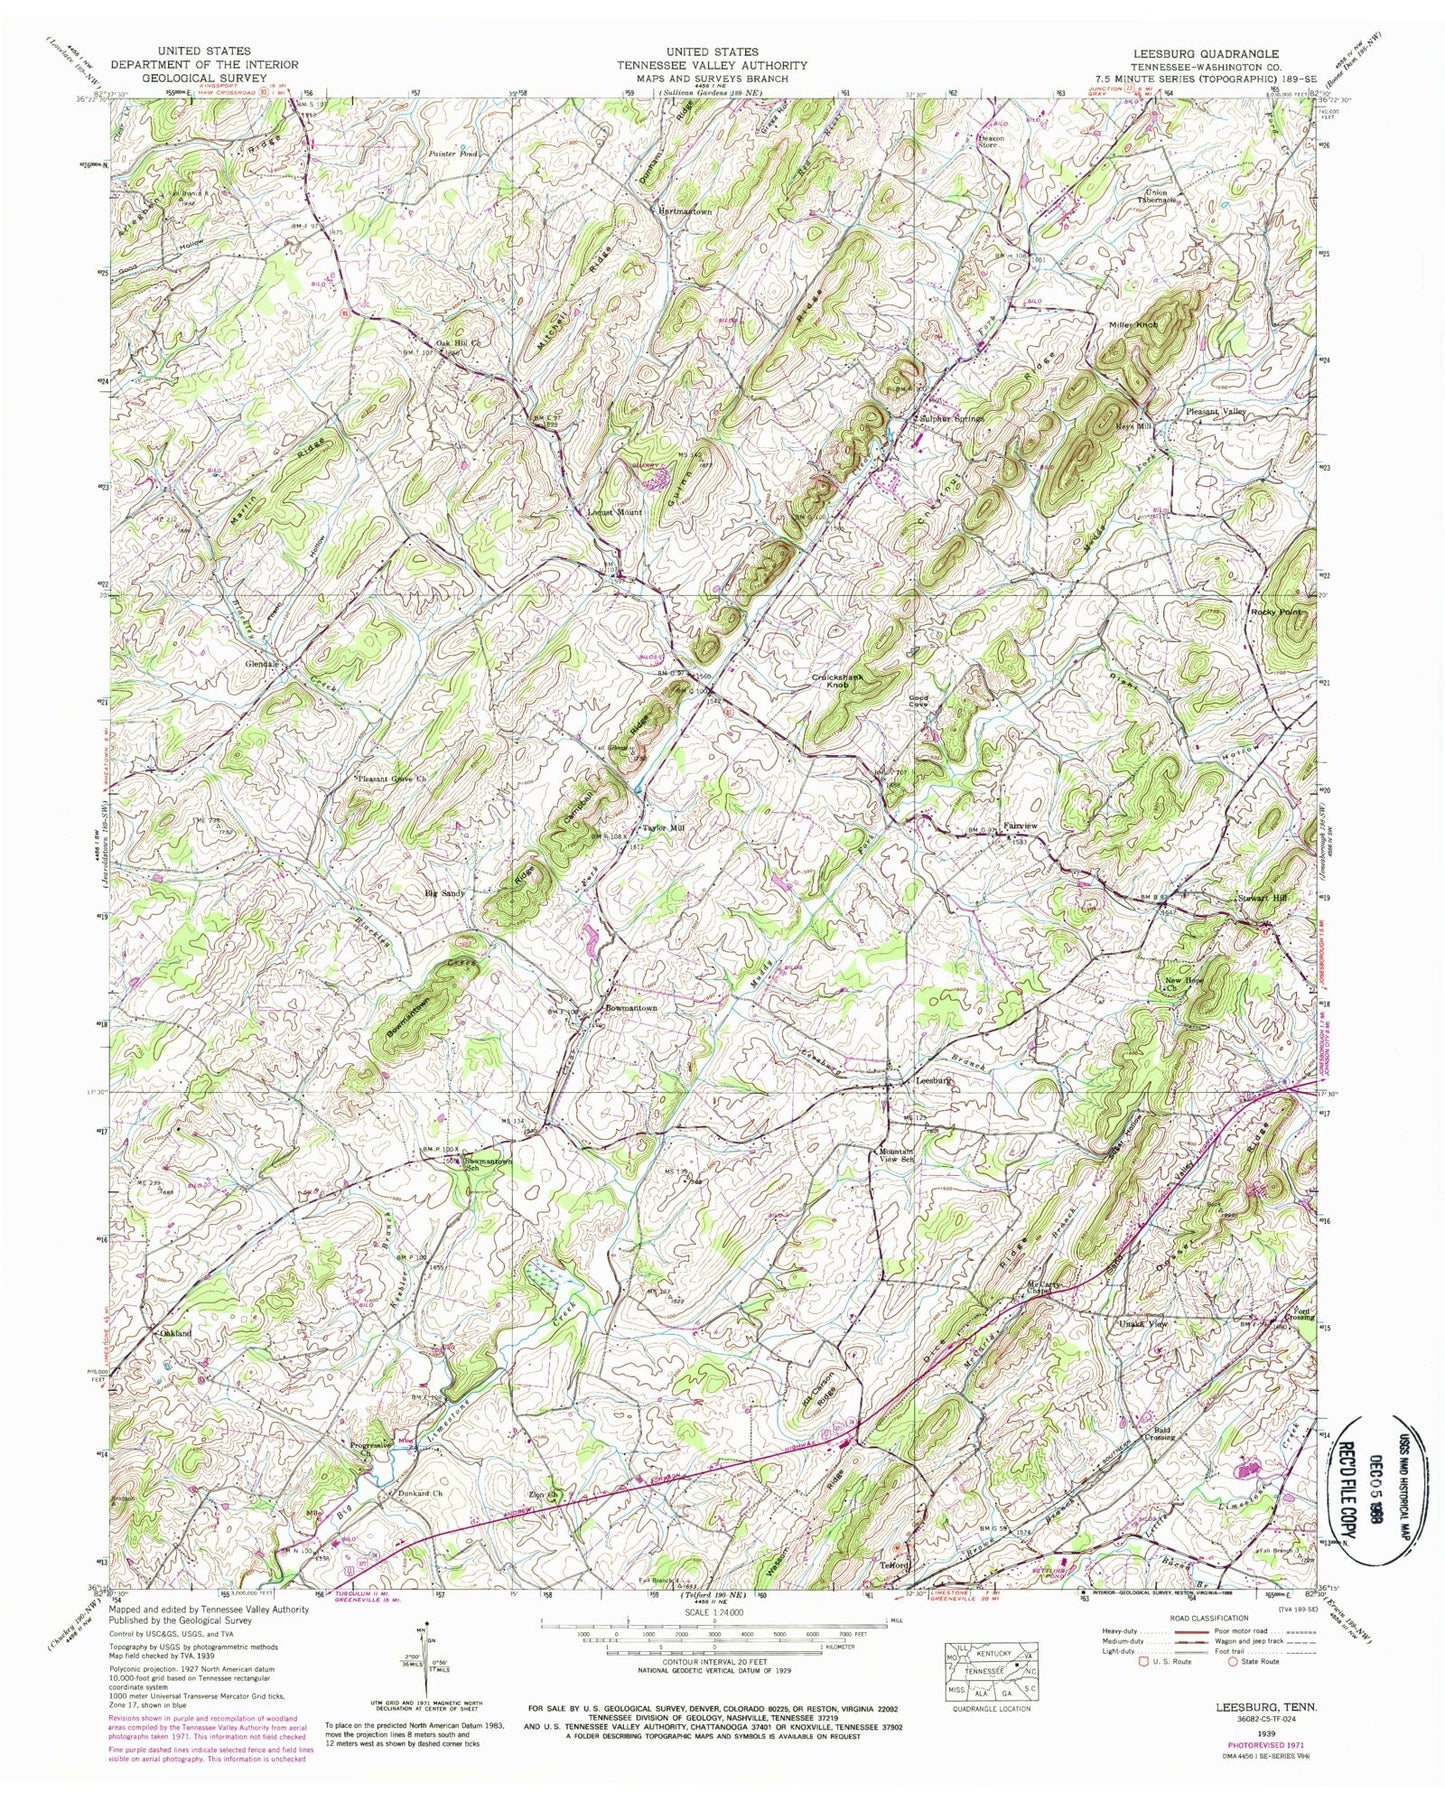 Classic USGS Leesburg Tennessee 7.5'x7.5' Topo Map Image